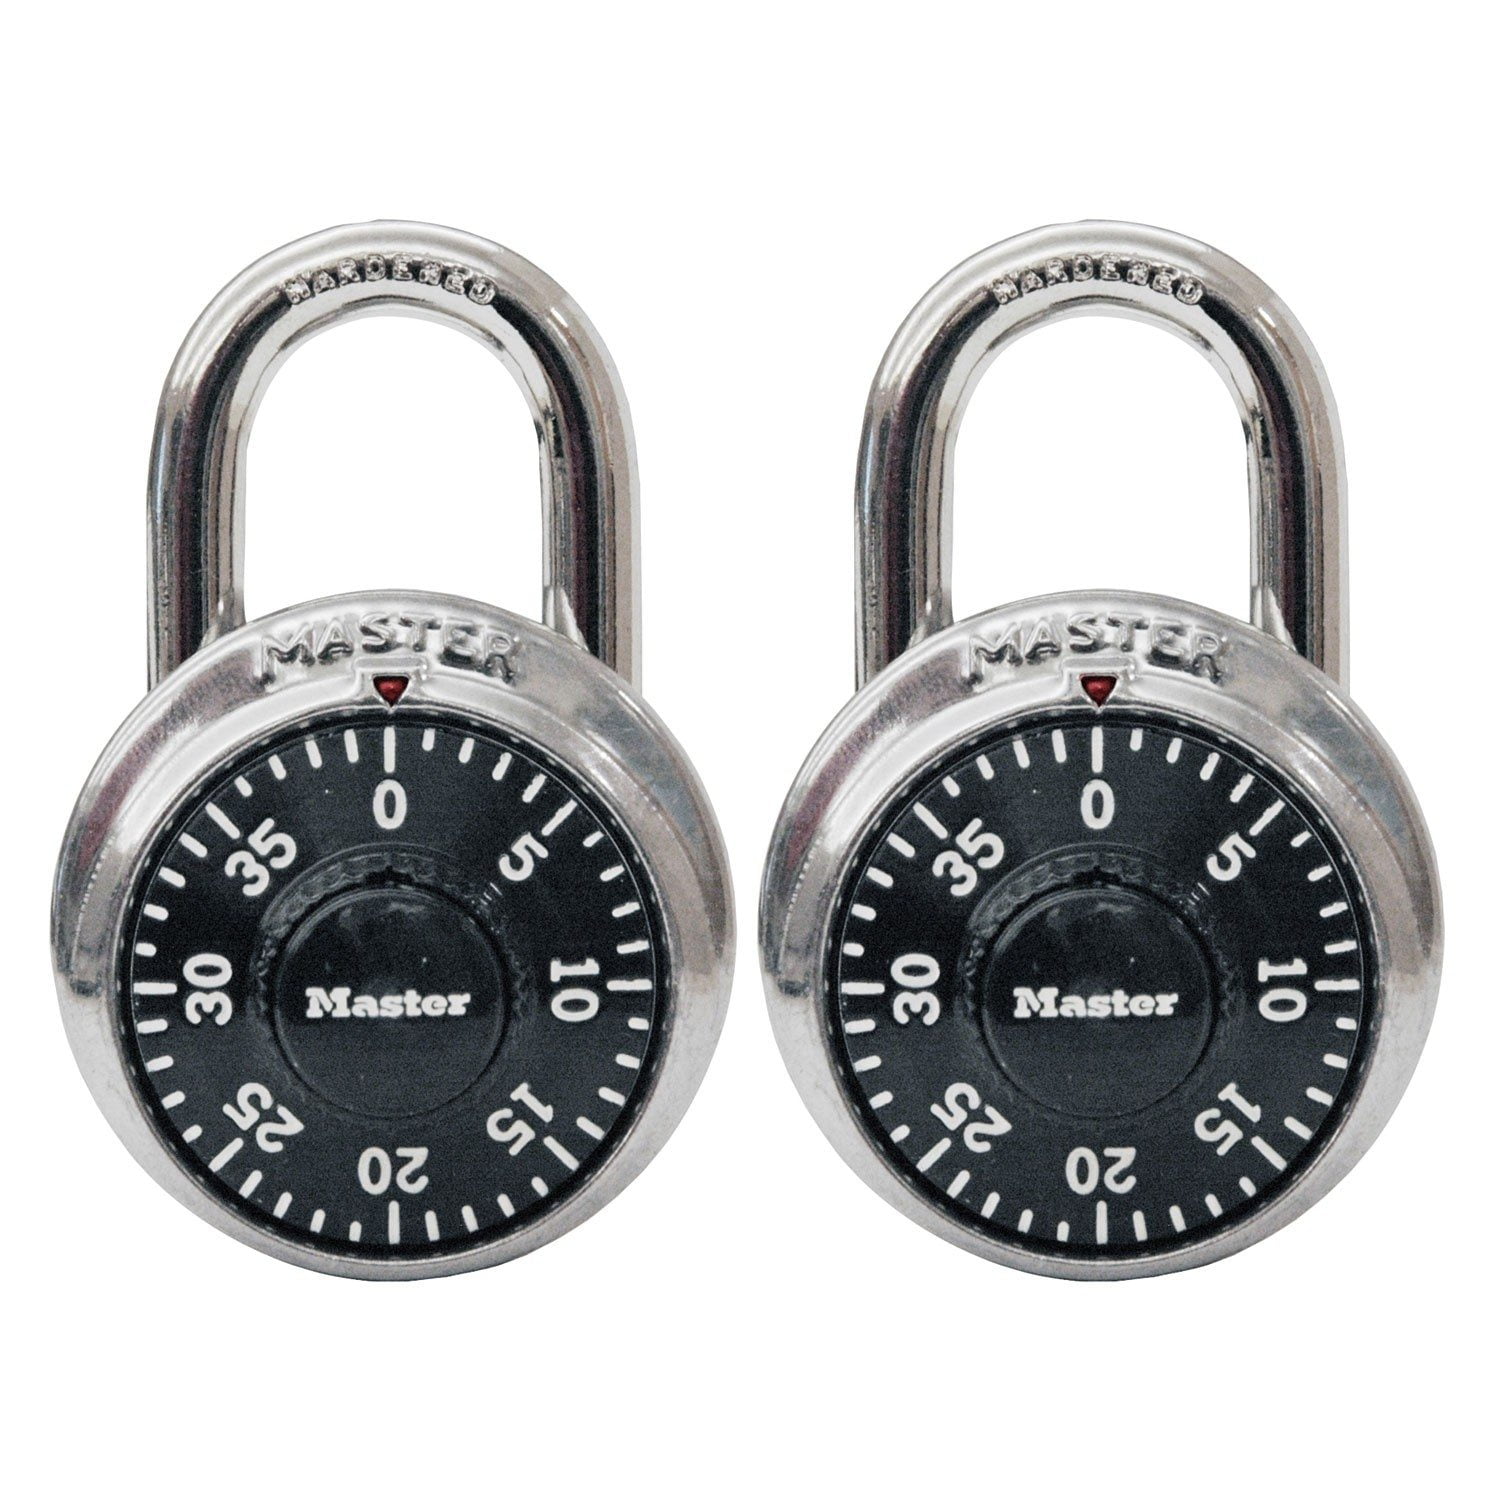 Here’s How To Crack A Combination Lock Quickly